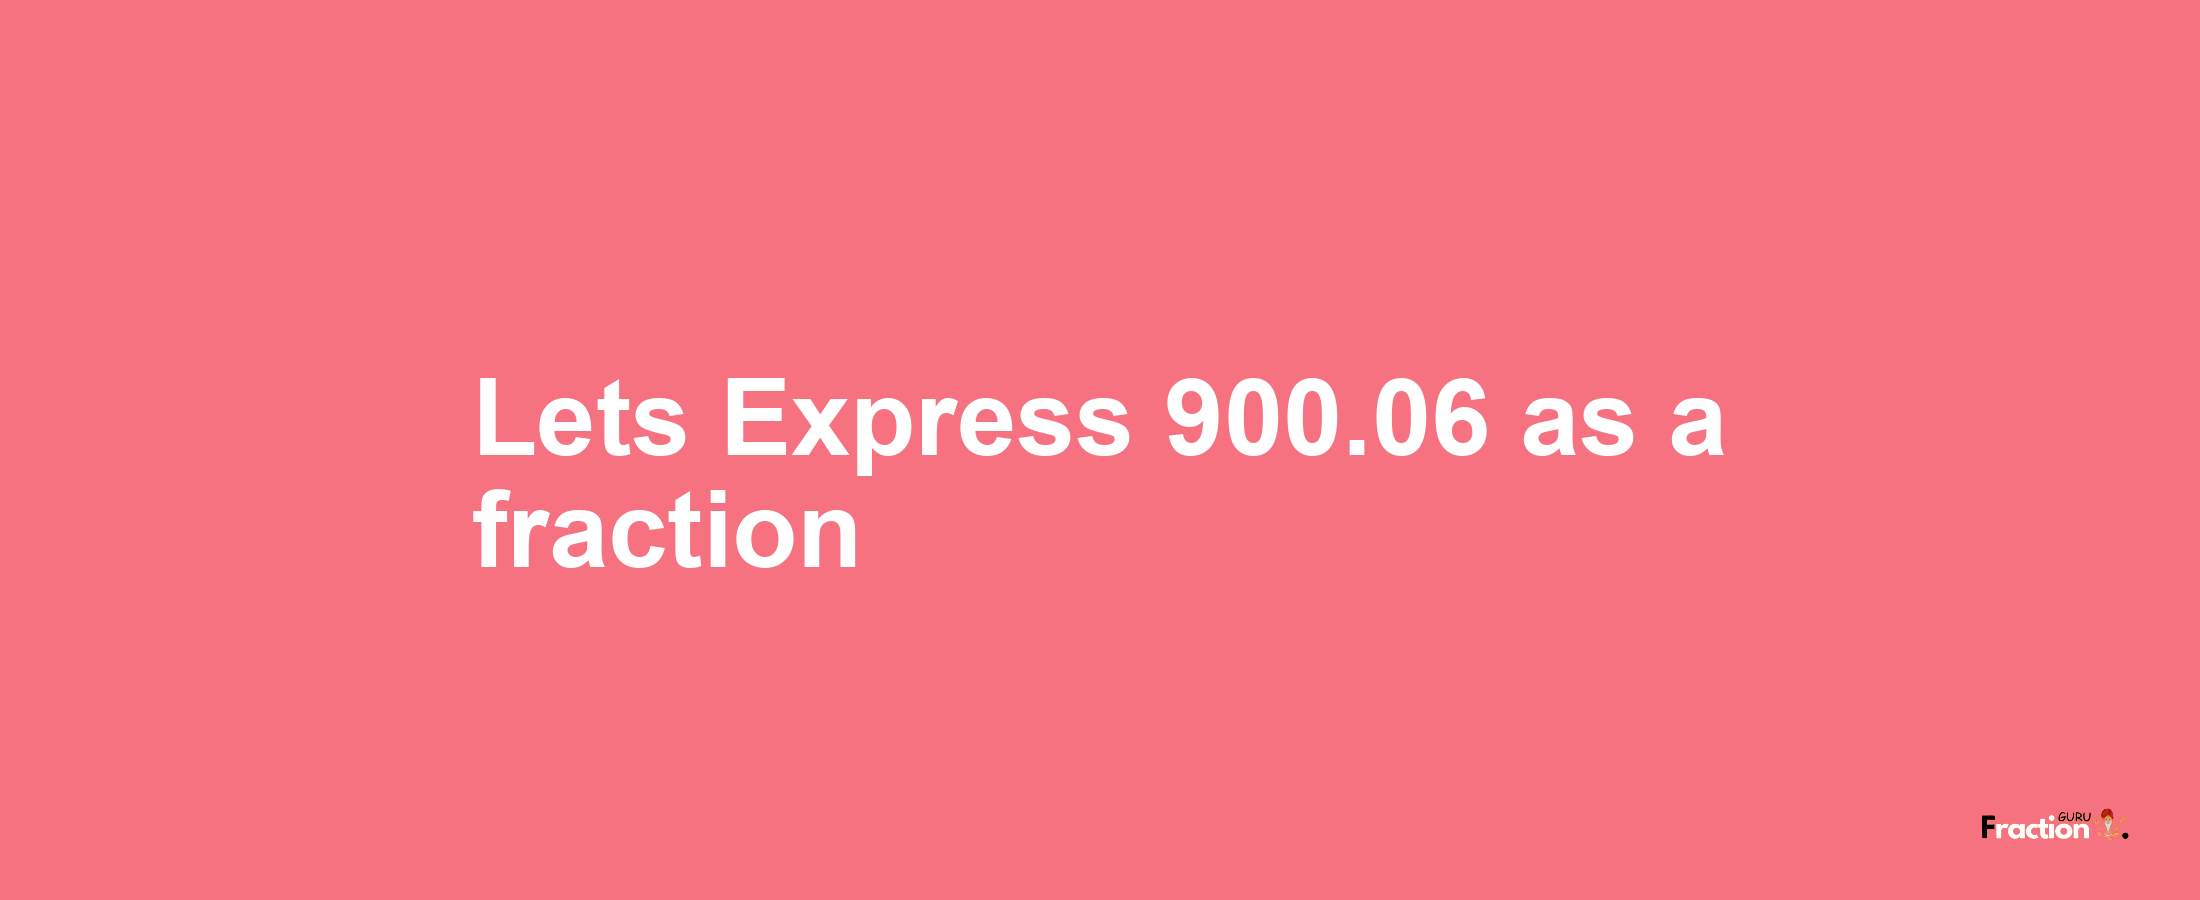 Lets Express 900.06 as afraction